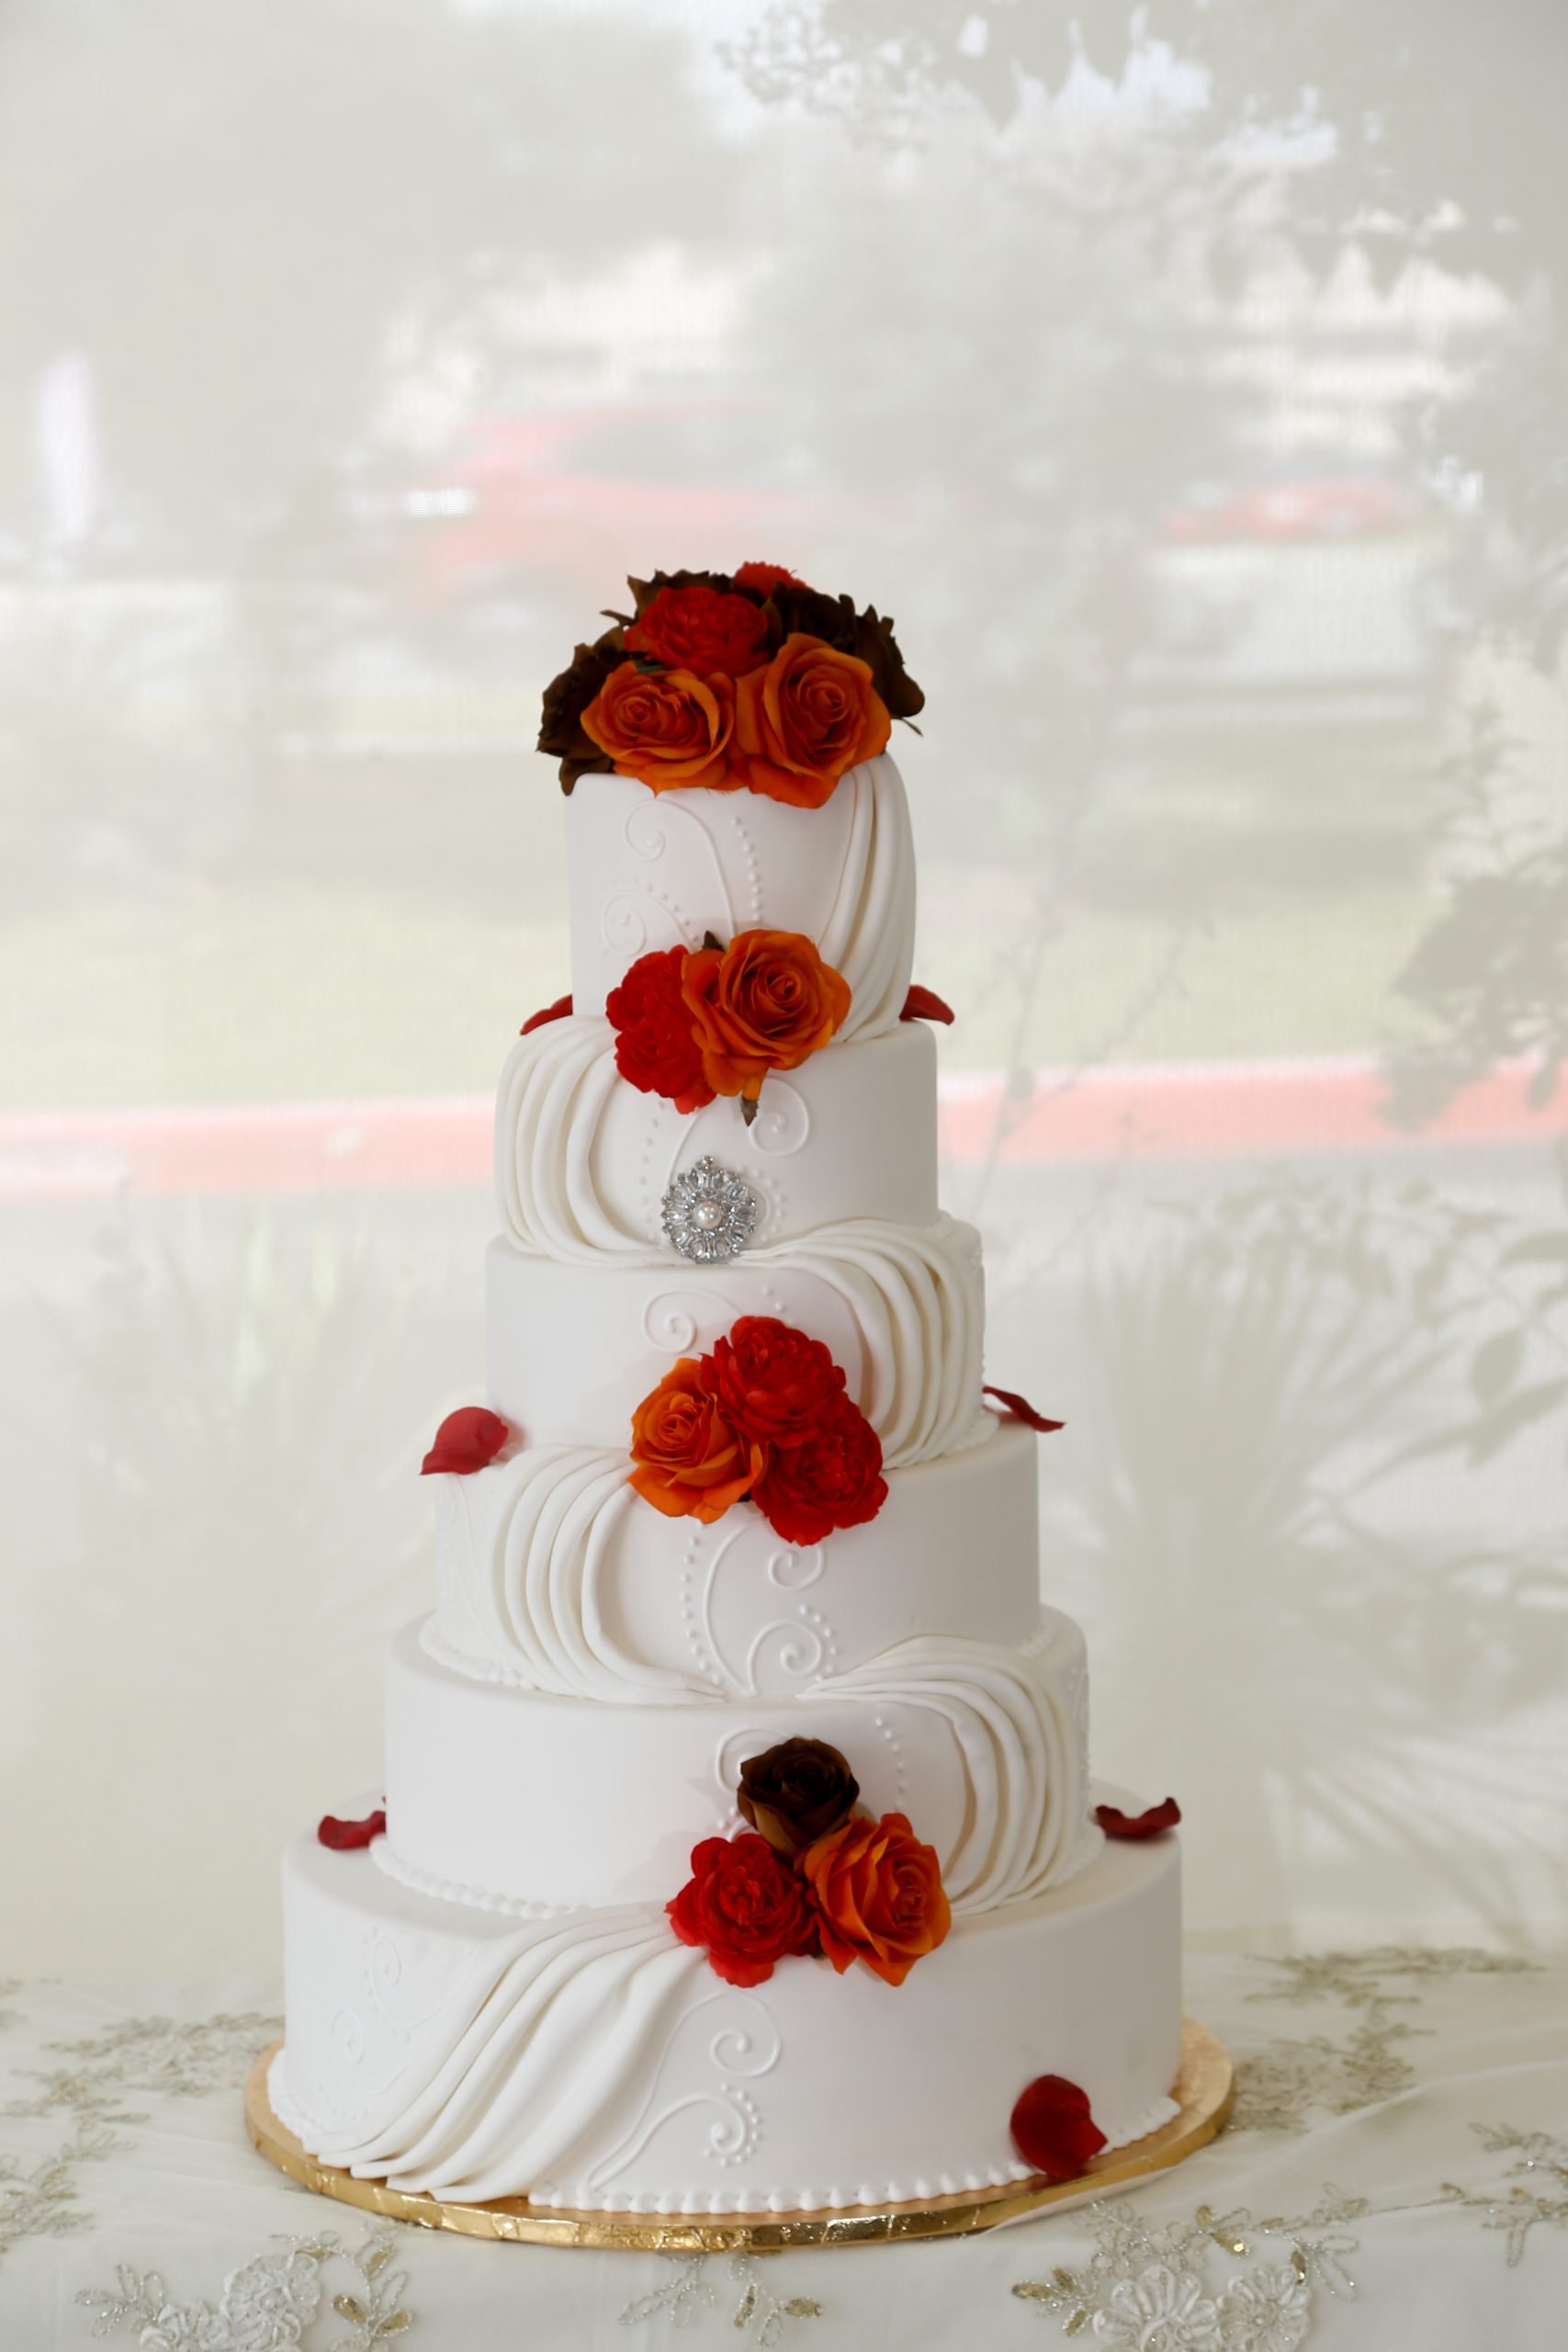 Blanca's Cakes & Catering